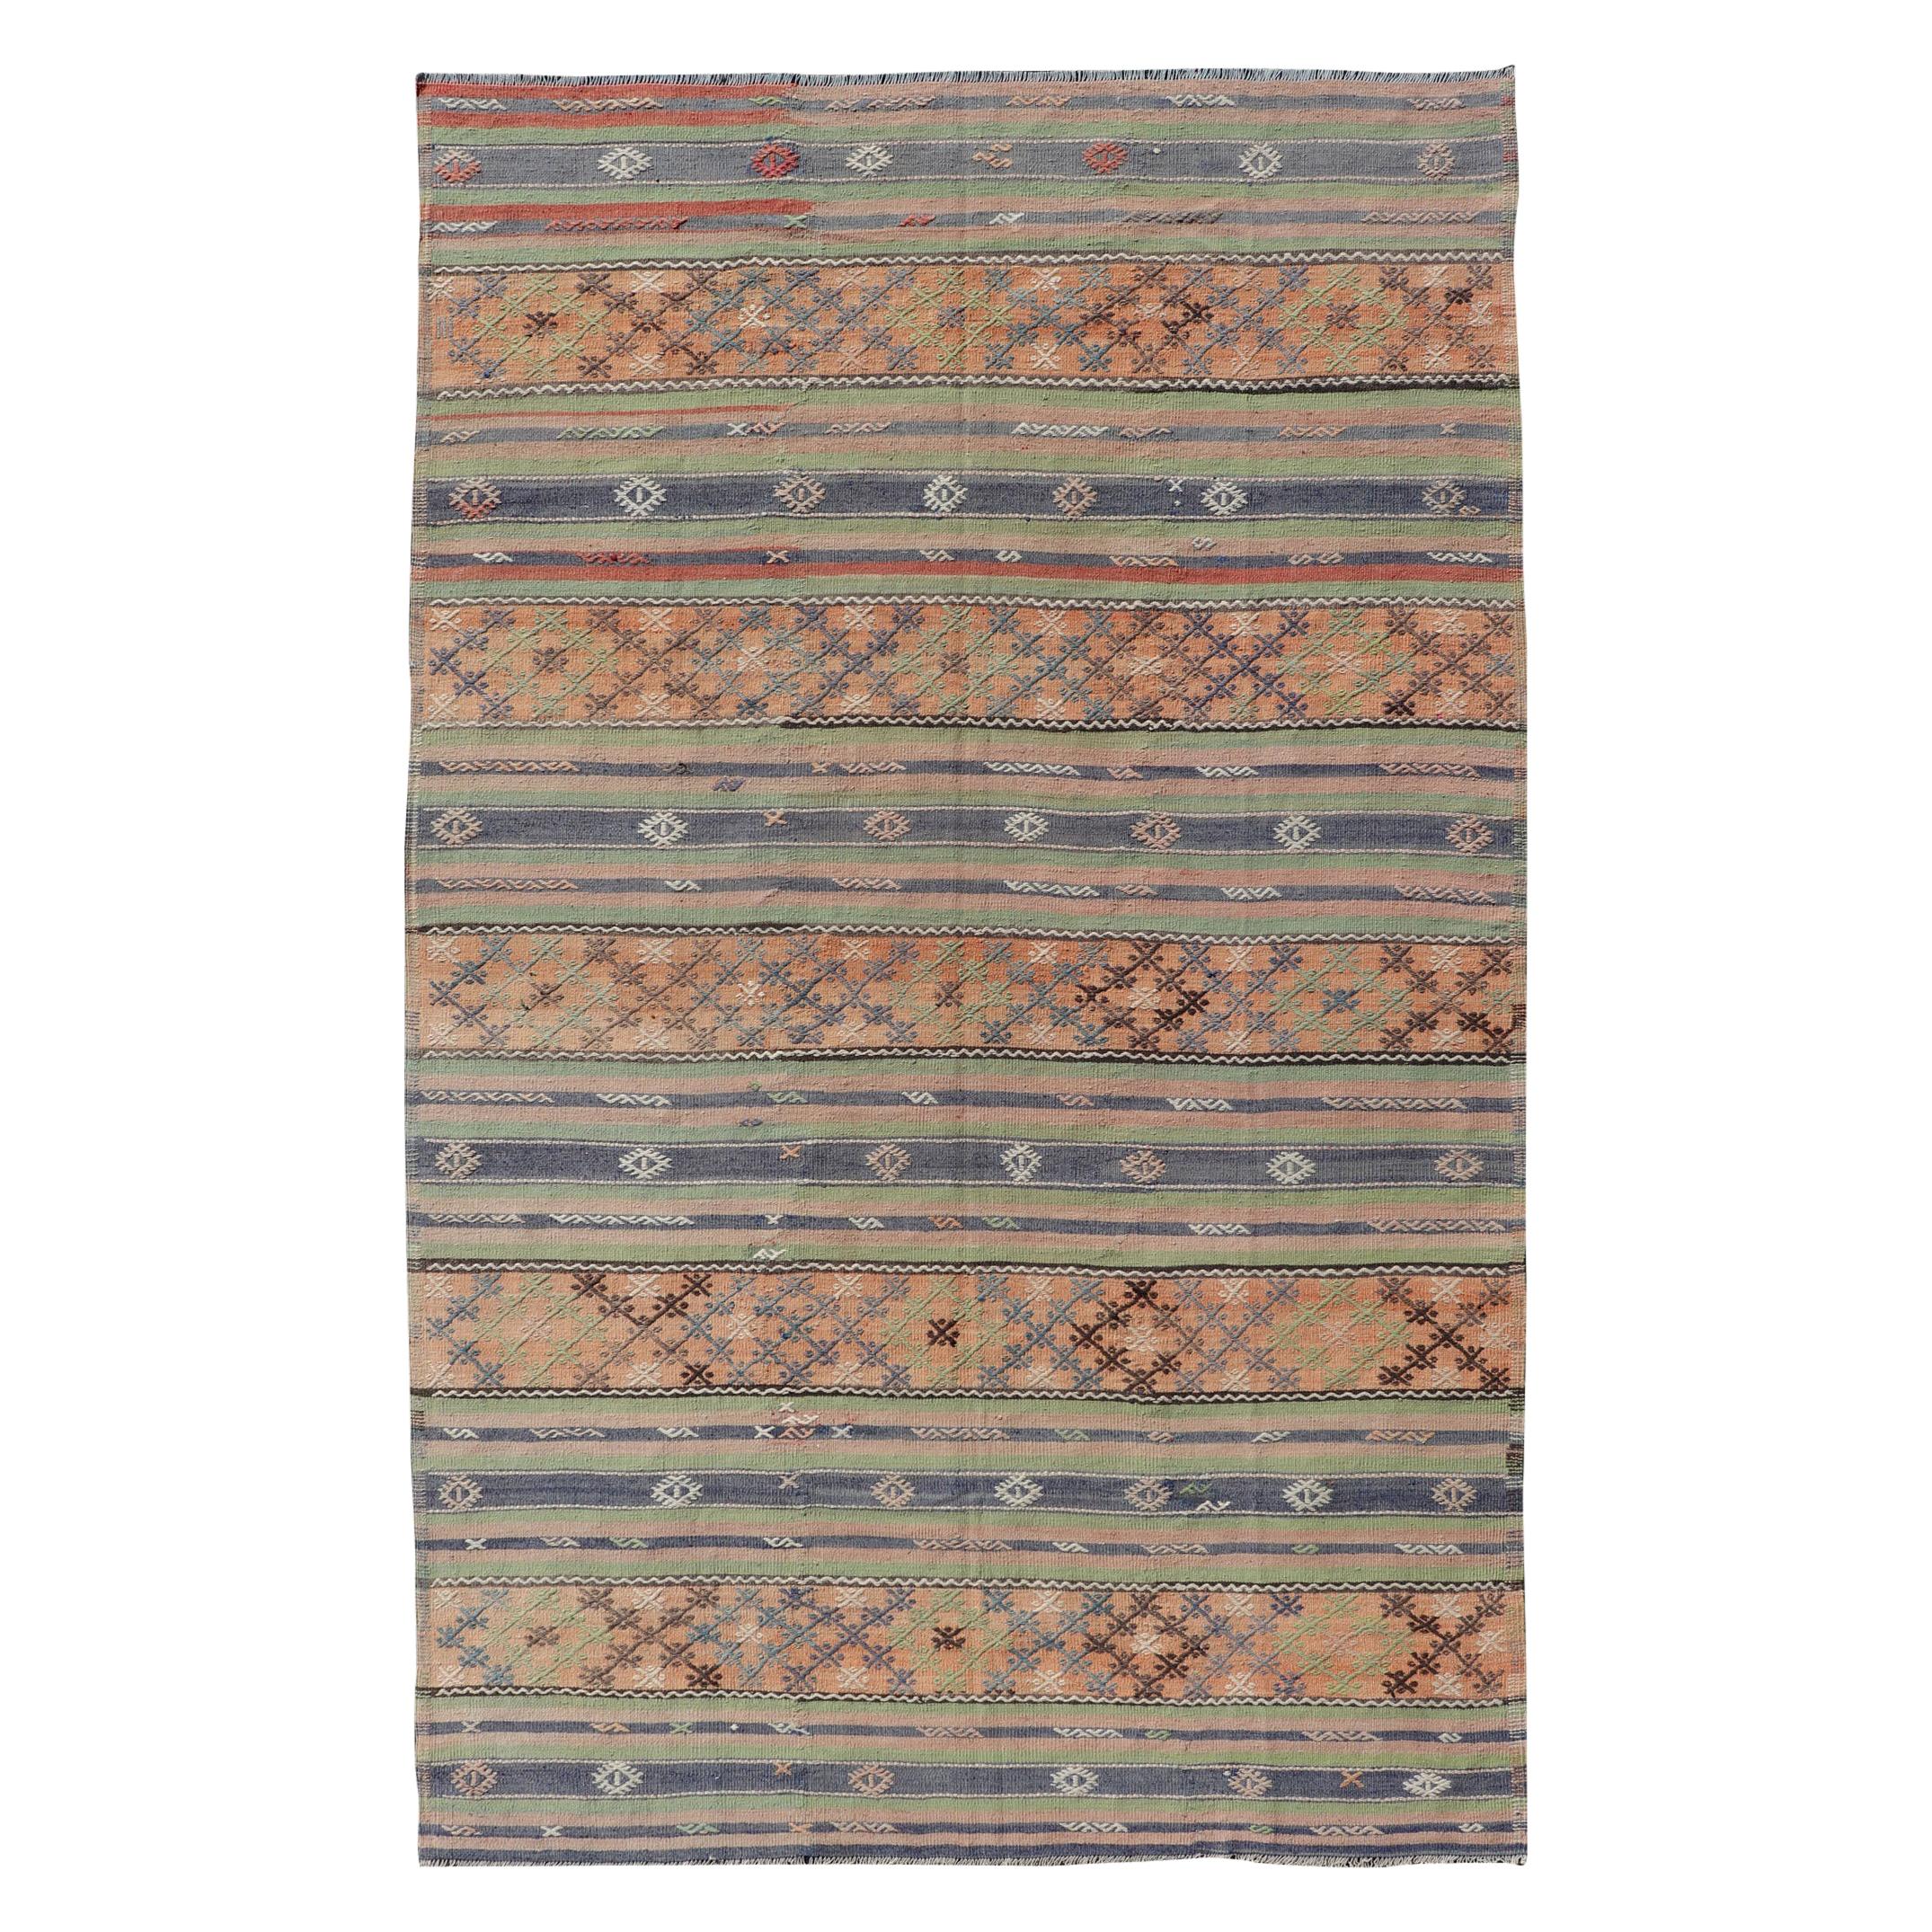 Colorful Turkish Kilim with Stripes and Geometric Elements in Orange and Green For Sale